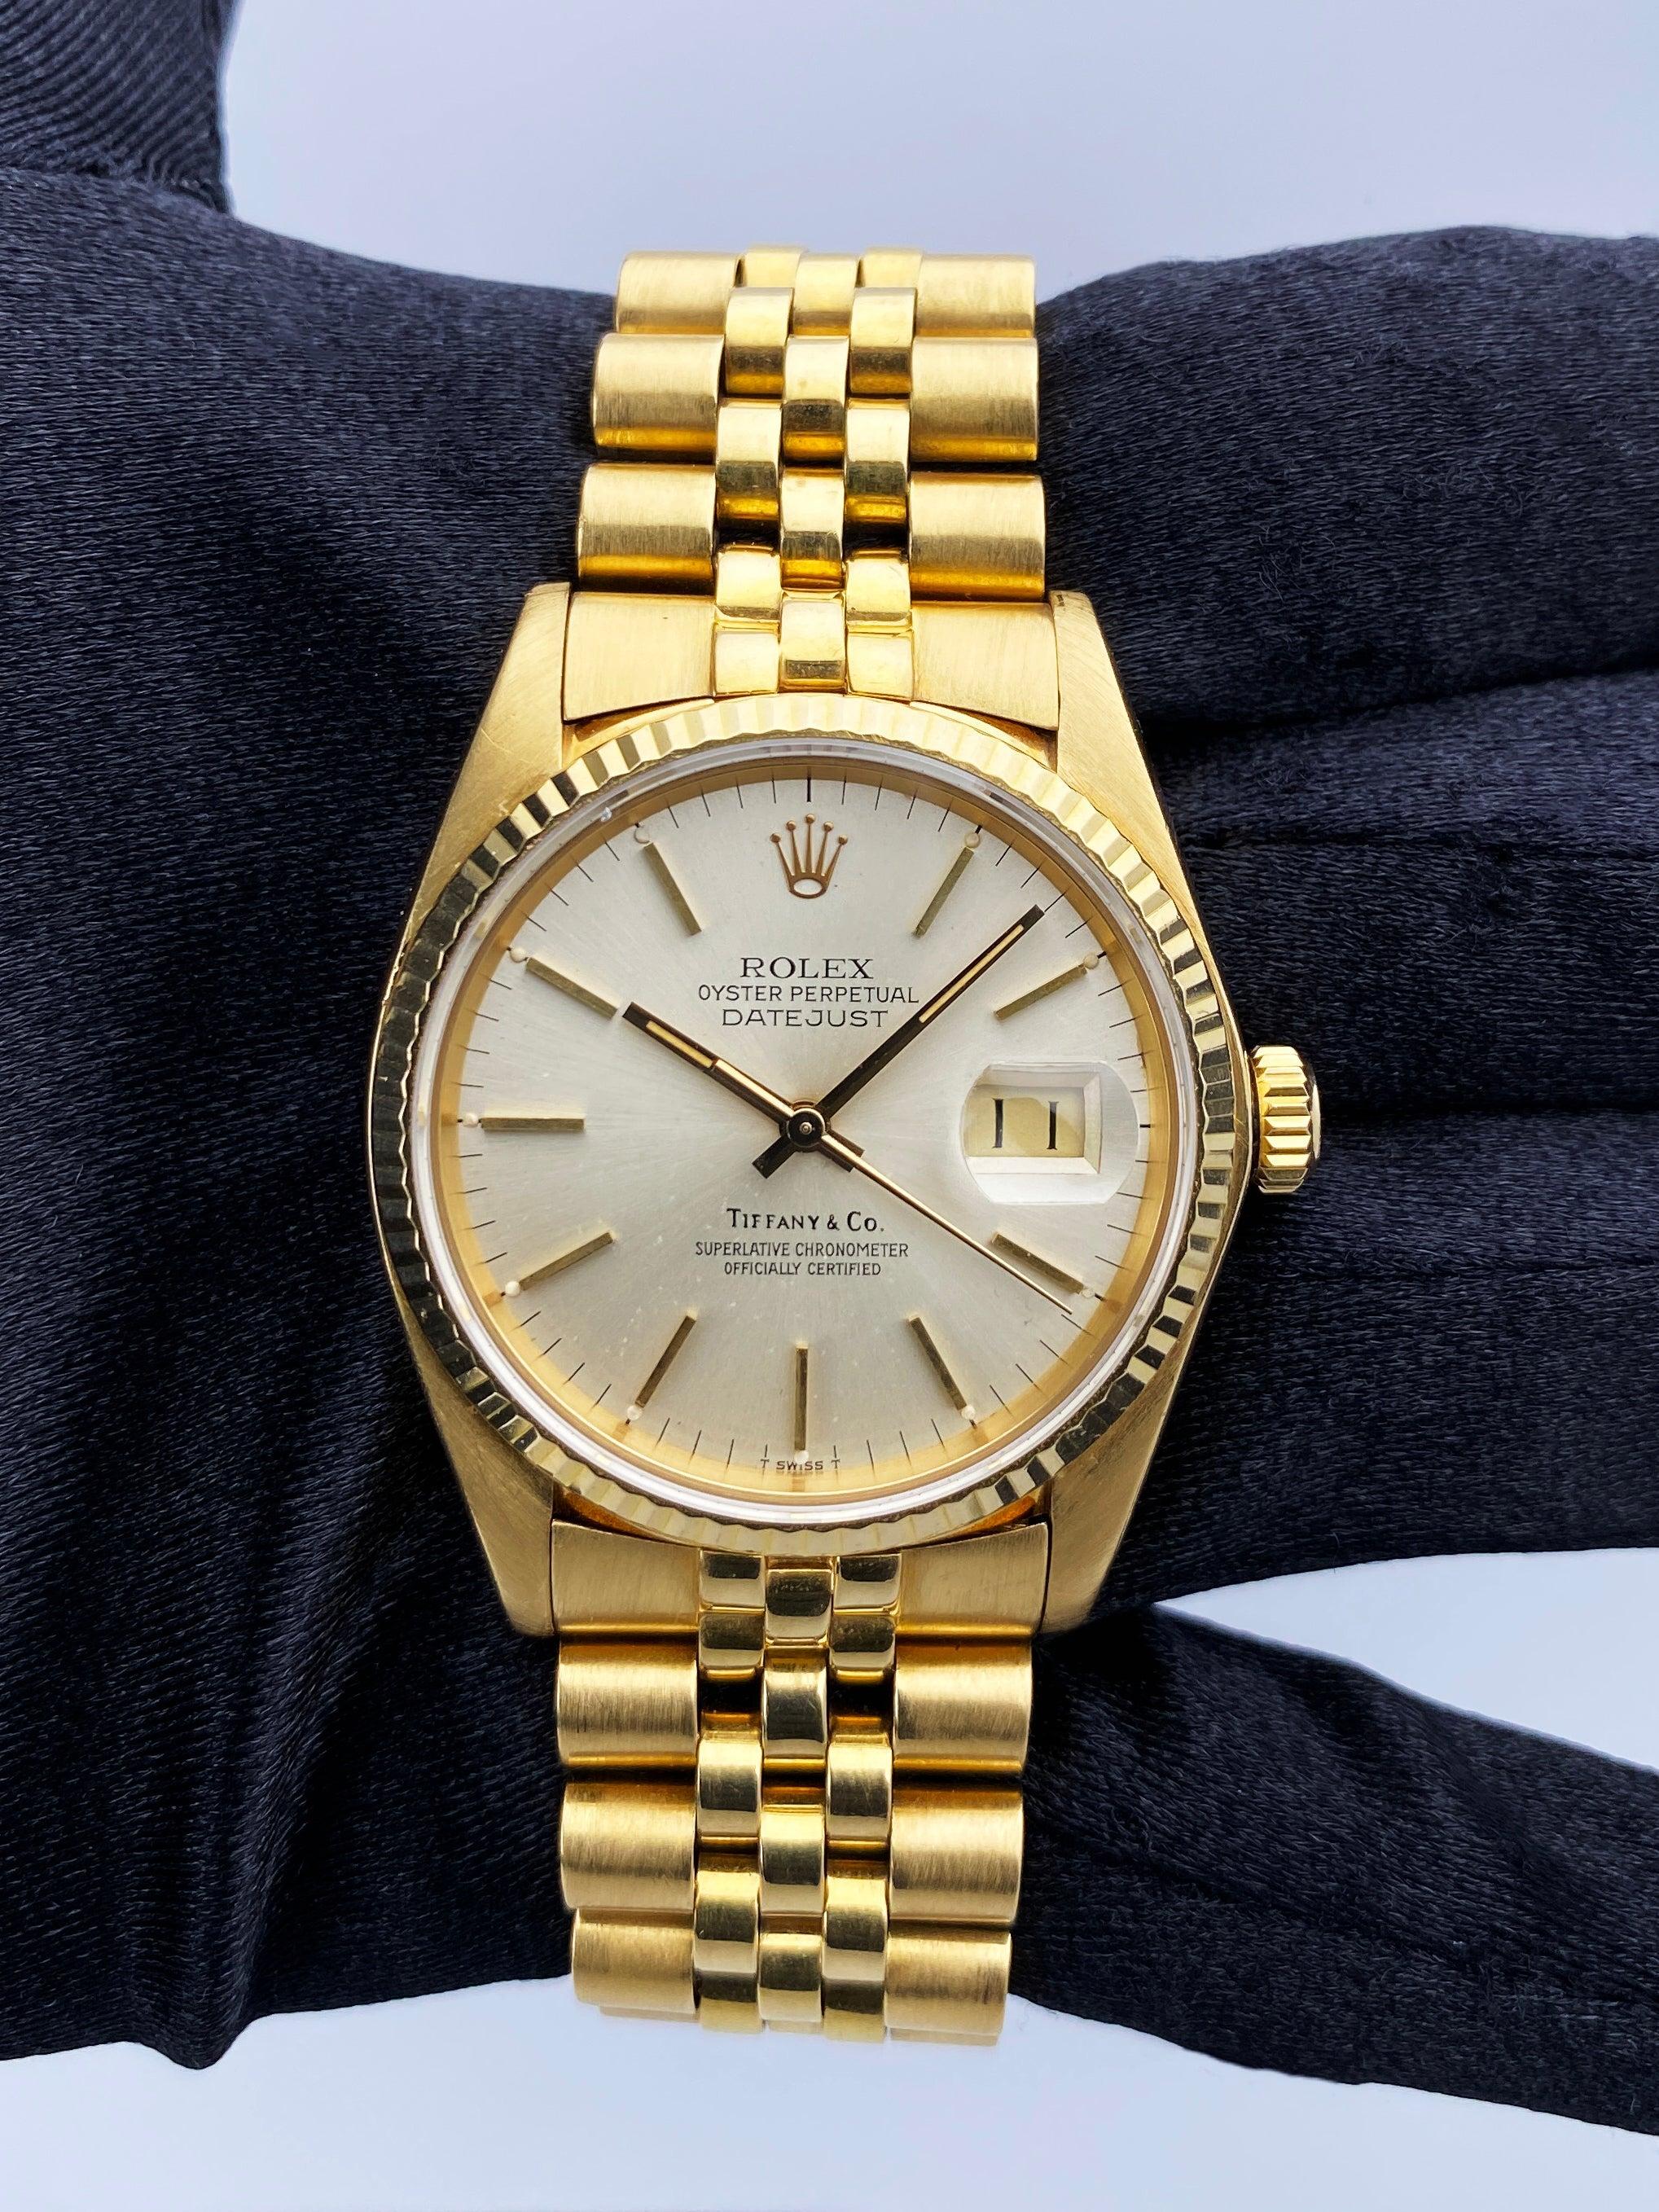 Rolex Datejust 16018 Mens Watch. 36mm 18K yellow gold case. 18K yellow gold fluted bezel. Tiffany & Co. dial with gold hands and index hour markers. Minute markers on the outer dial. Date display at the 3 o'clock position. 18k yellow gold